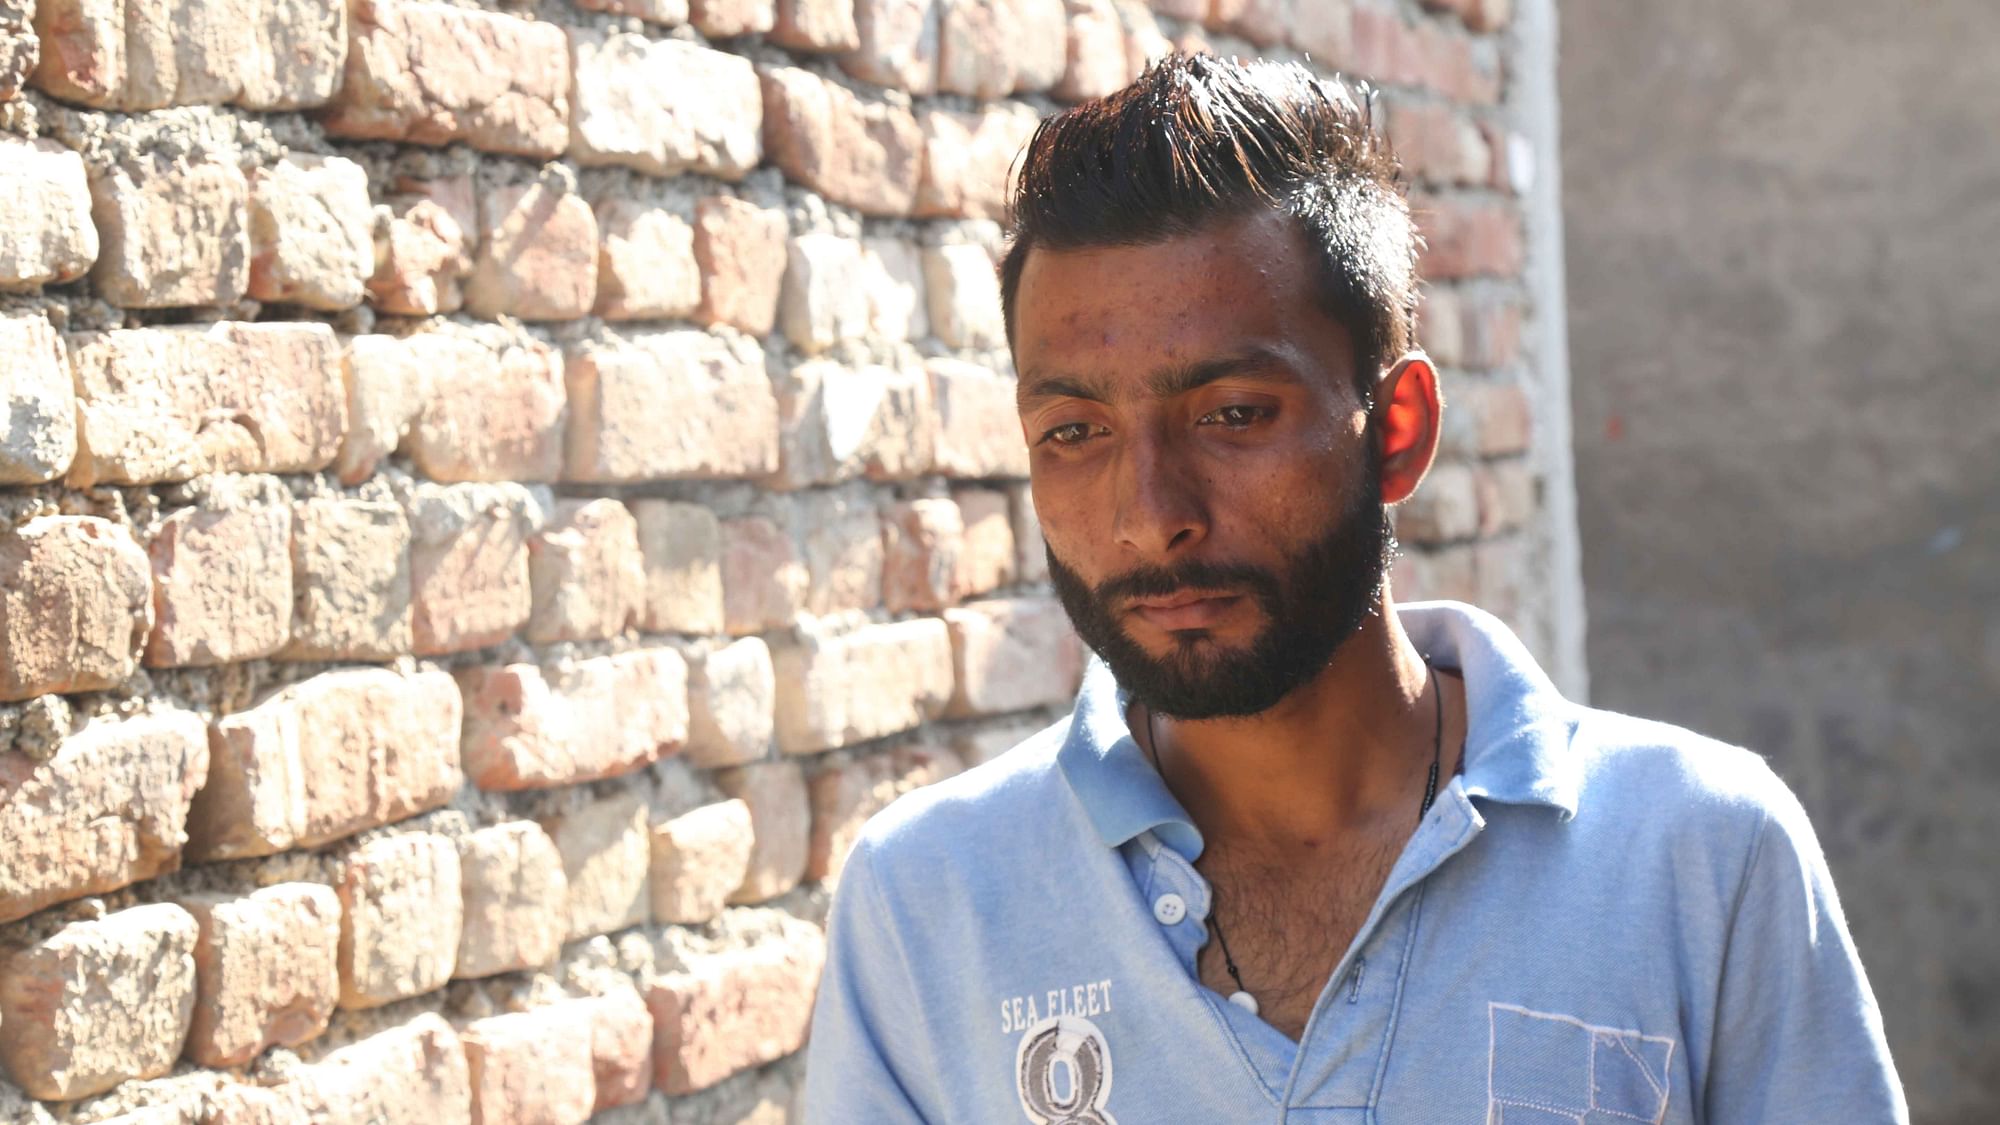 Harjit Masih is the only one who has returned to India out of 40 Indians kidnapped by the ISIS in June 2014. (Photo: Siddharth Safaya/<b>The Quint</b>)&nbsp;